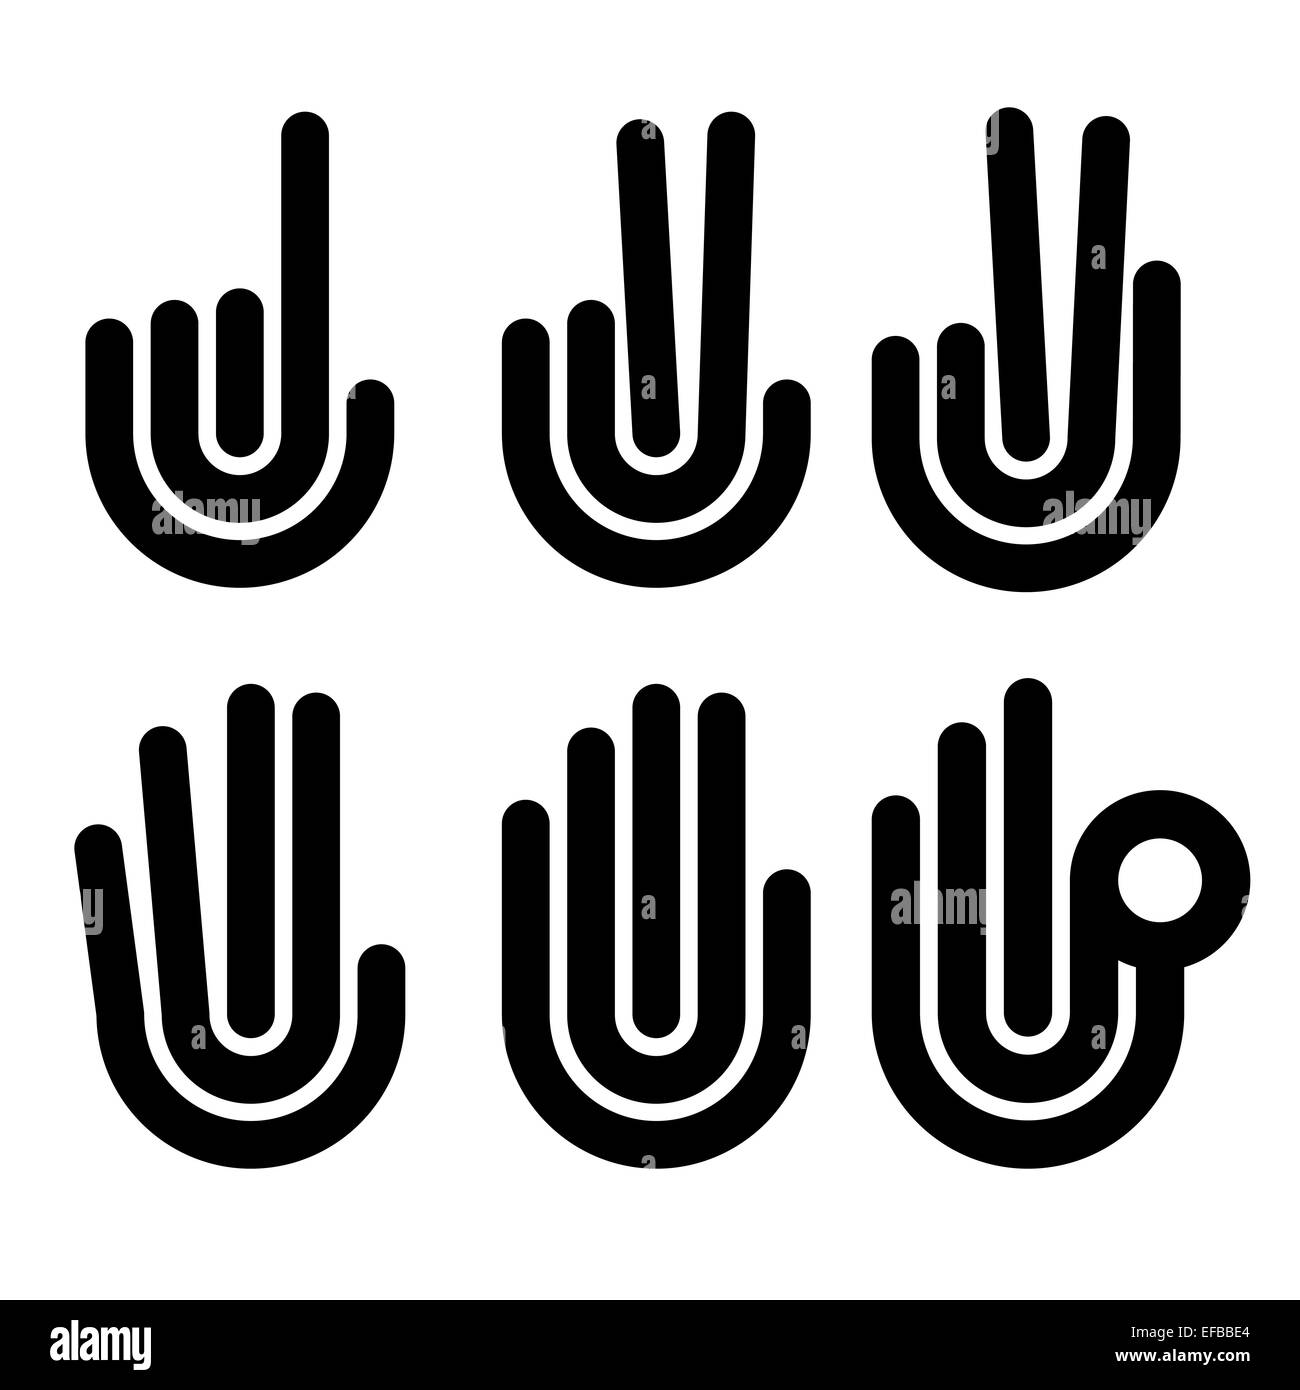 Hand gestures counting symbols from 1 to 5 Stock Photo